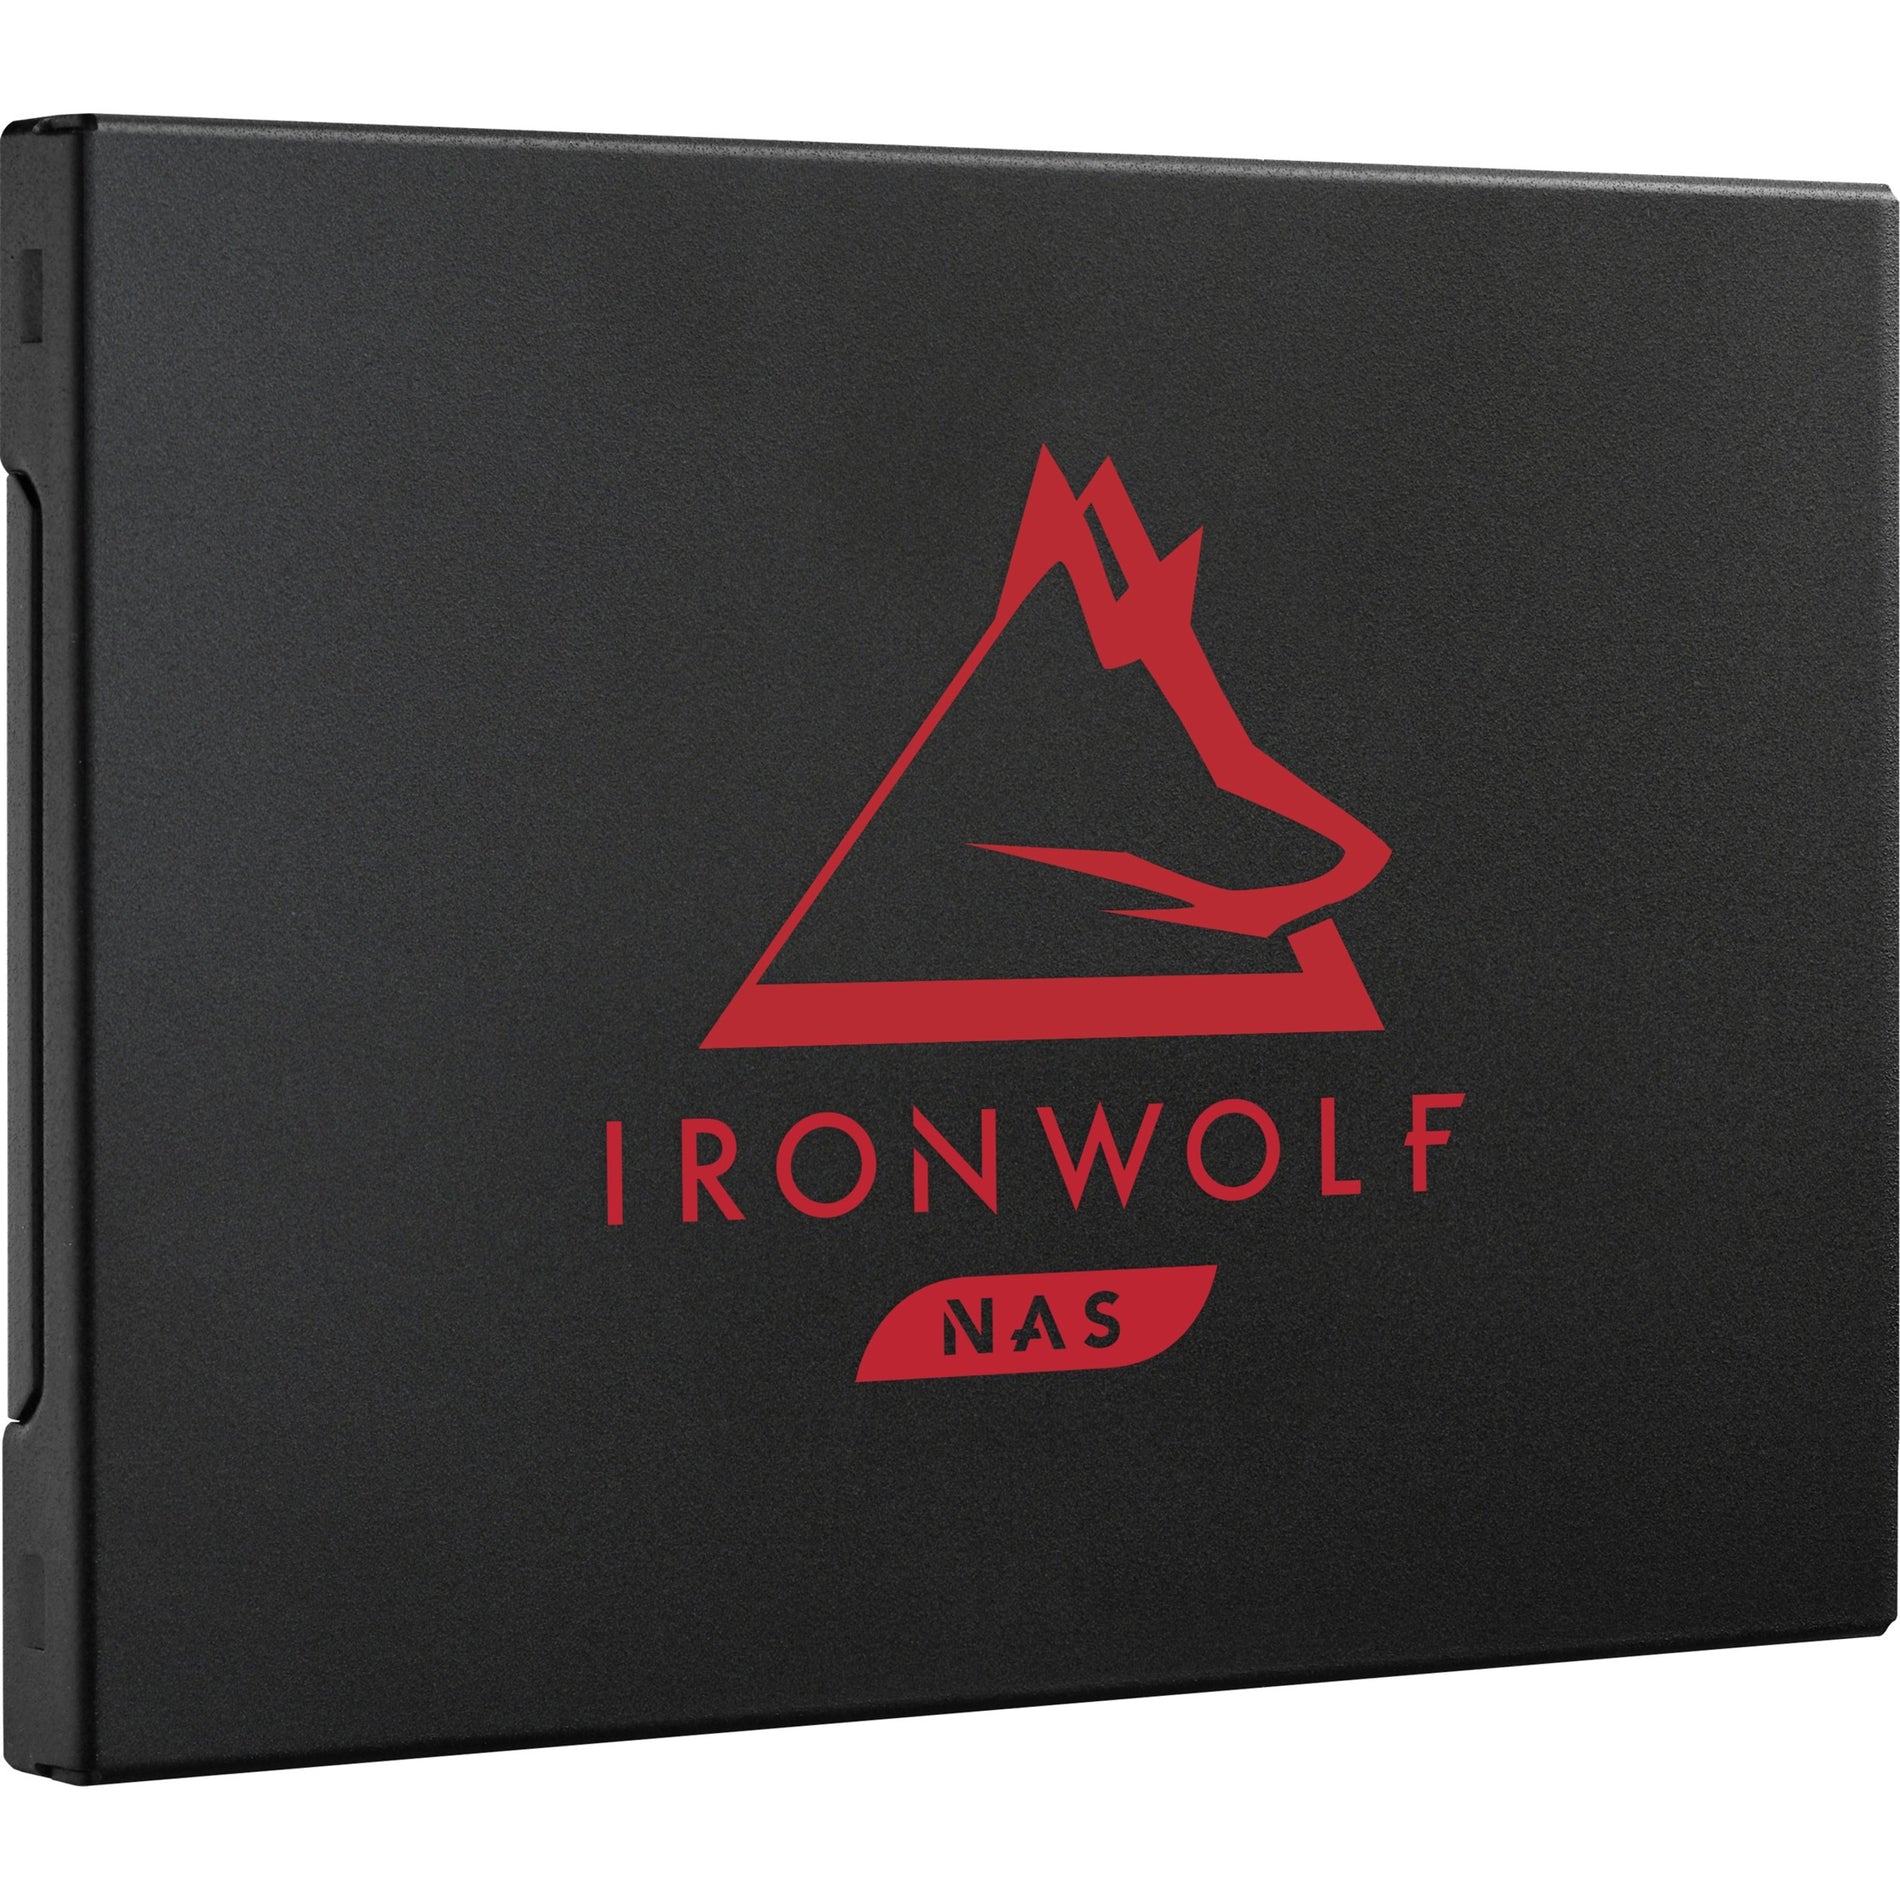 Seagate ZA250NM1A002 IronWolf 125 SSD 250GB Retail 2.5in SATA 6Gb/s 7mm 3D TLC, High-Performance Solid State Drive for Reliable Storage